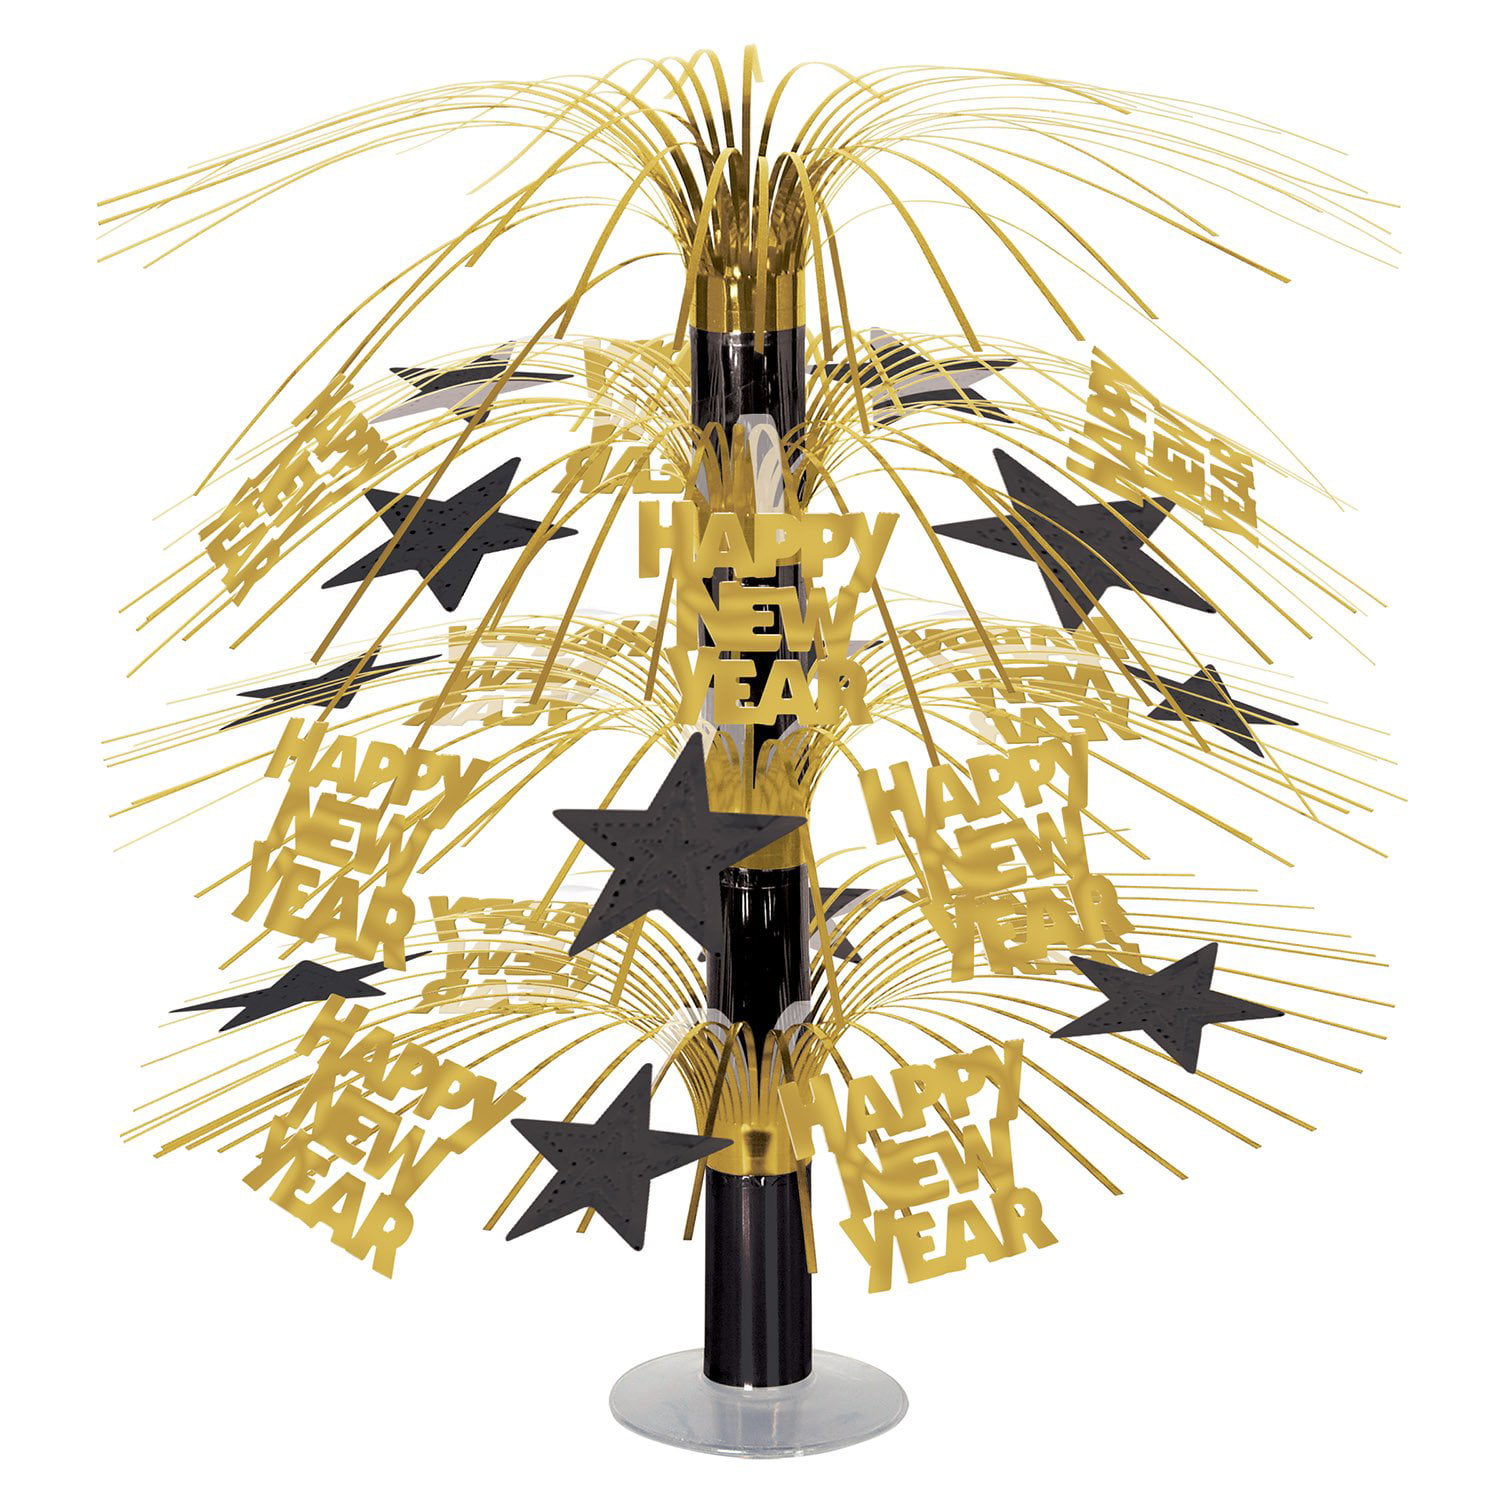 Stars Cascade Mini Table Centrepiece Black Silver Gold Table Decorations FREE PP 